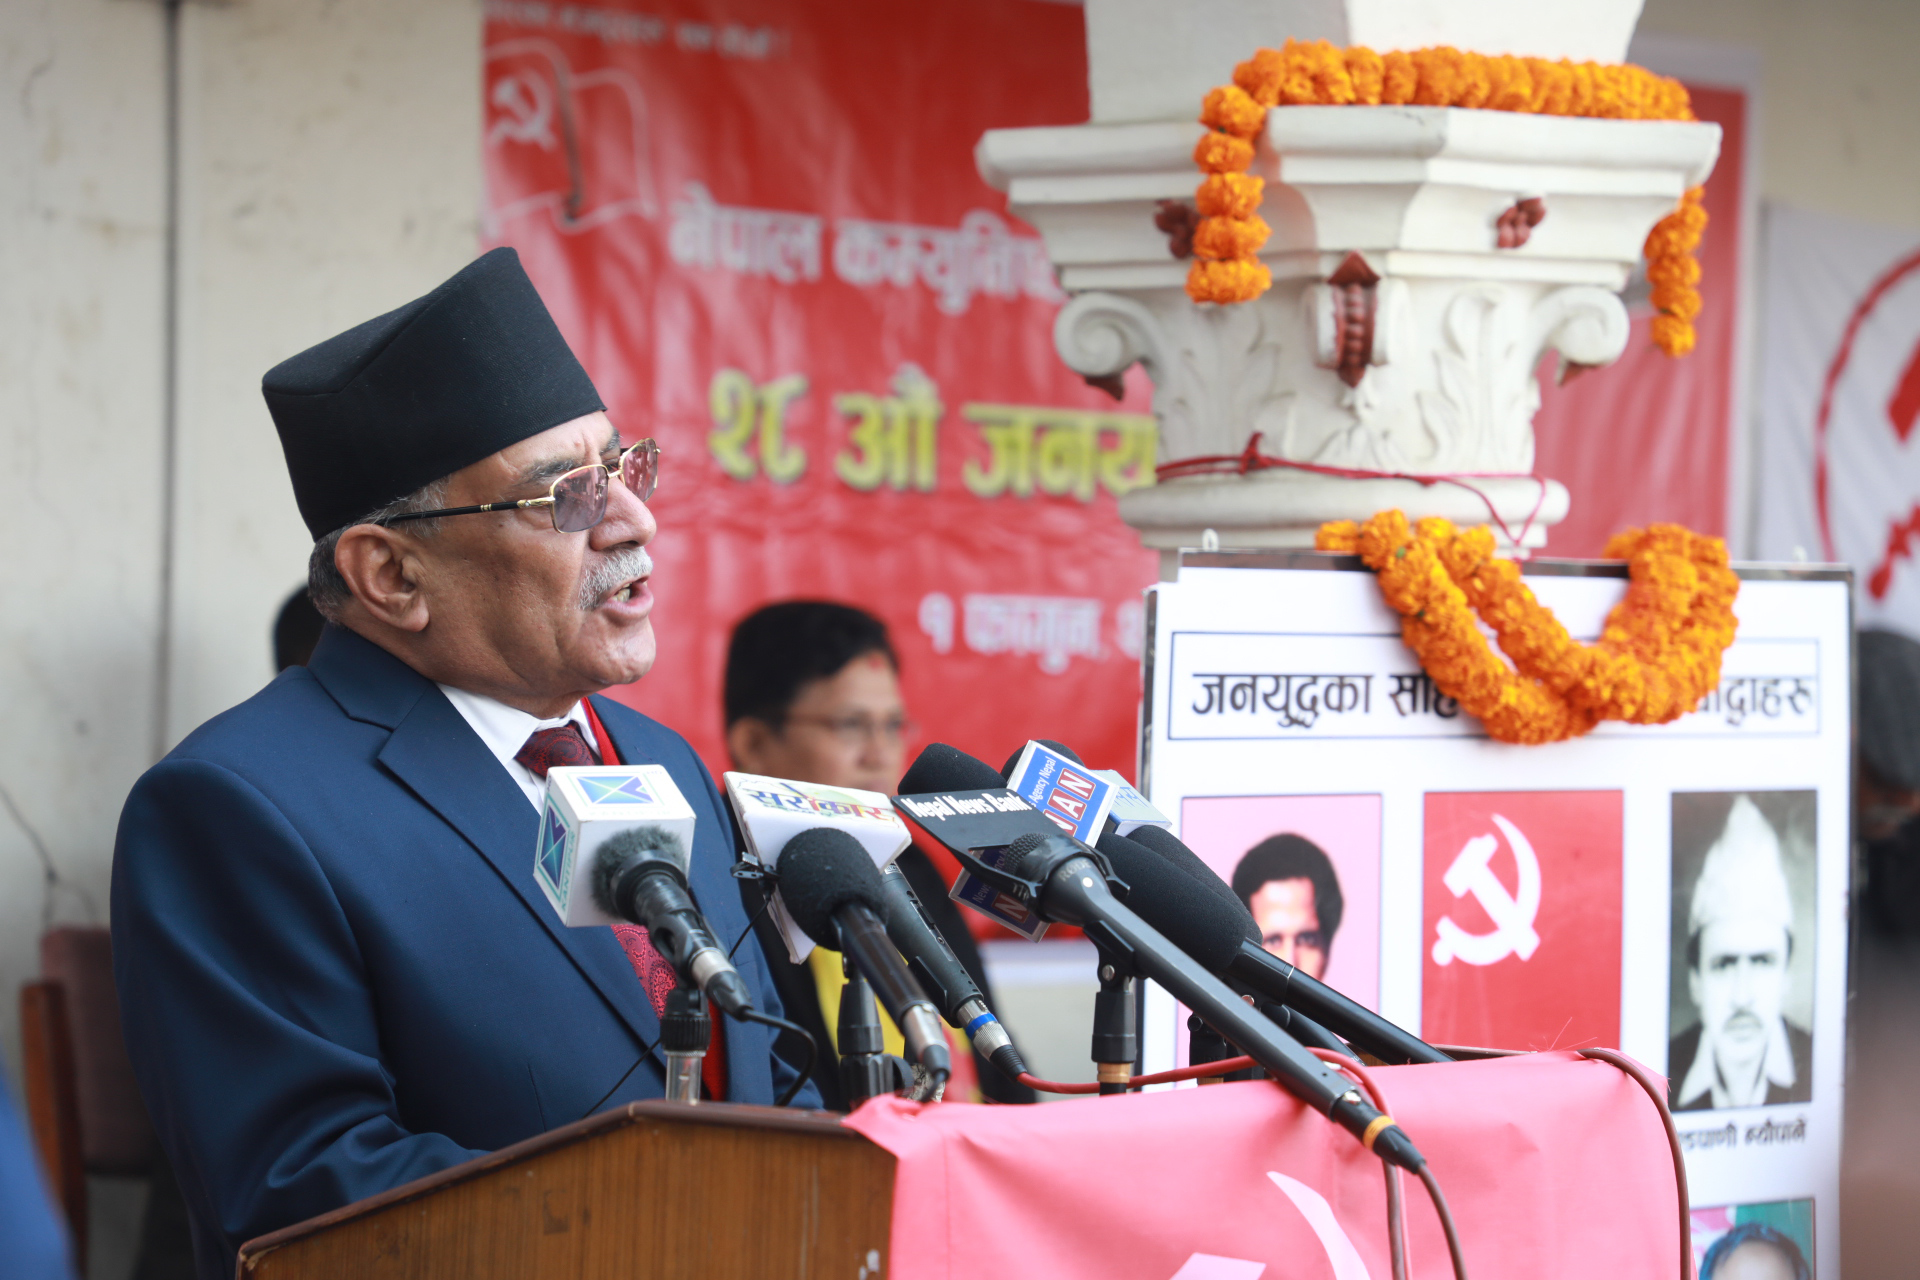 Maoist Center to make unity with like-minded parties to form Socialist Front: PM Dahal